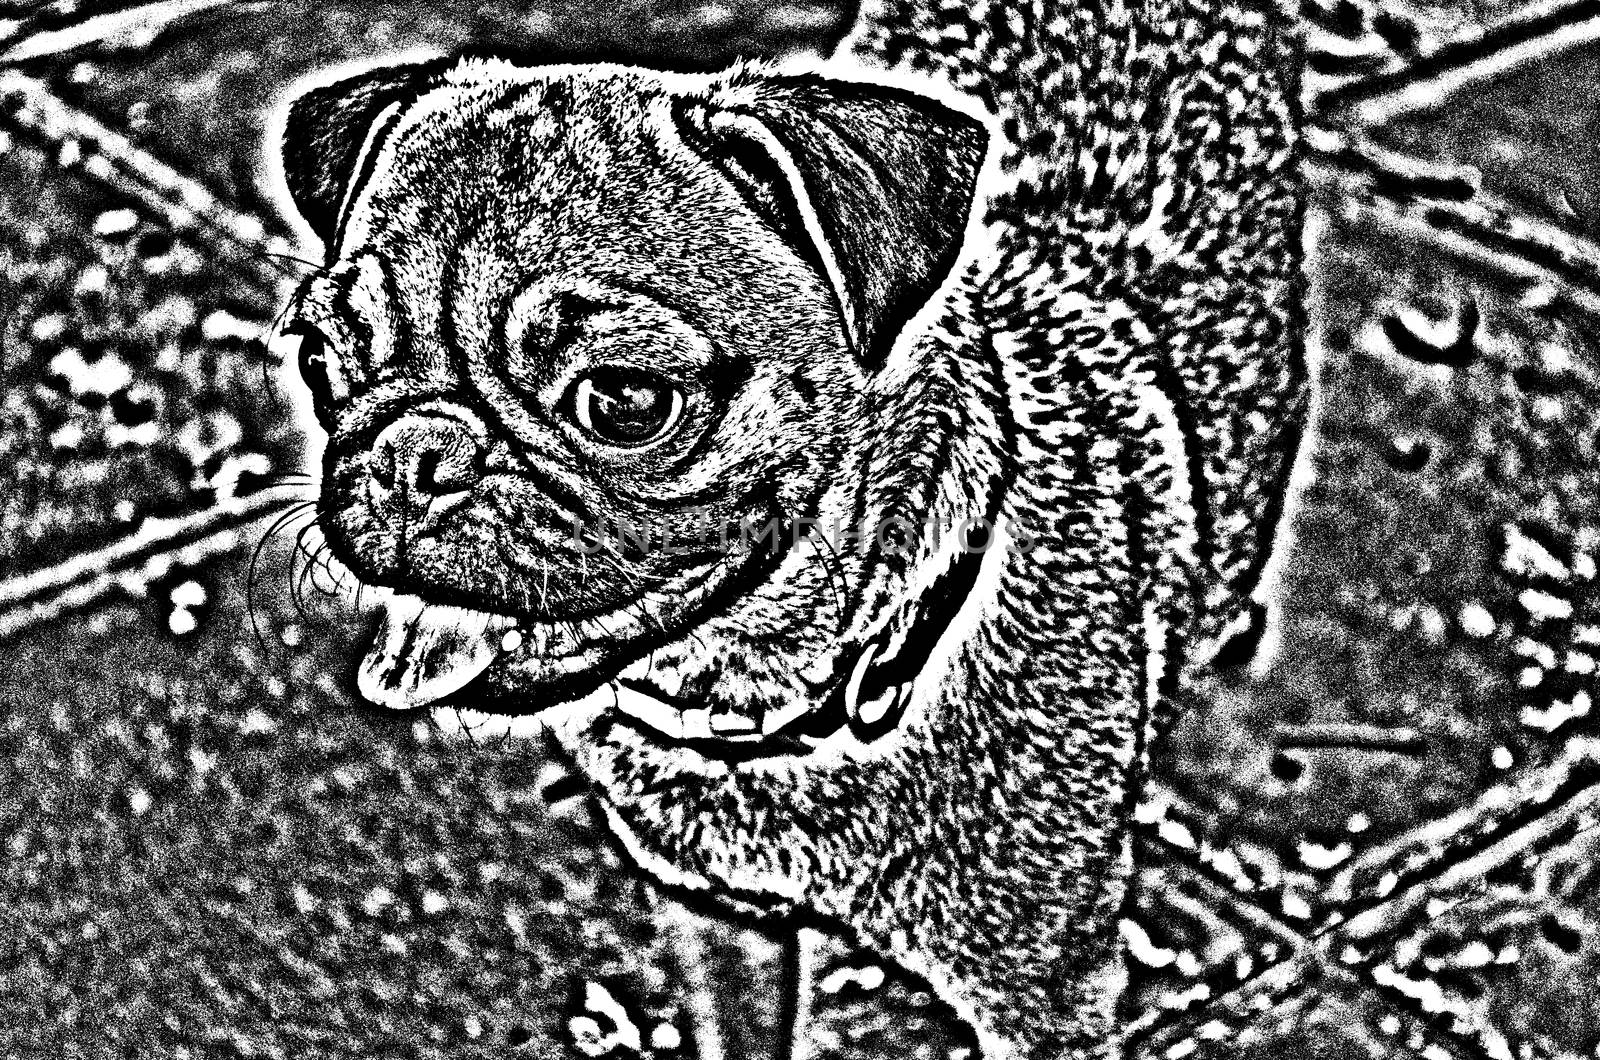 Cute Dog Series 1 No.3,made from photo by photoshop.